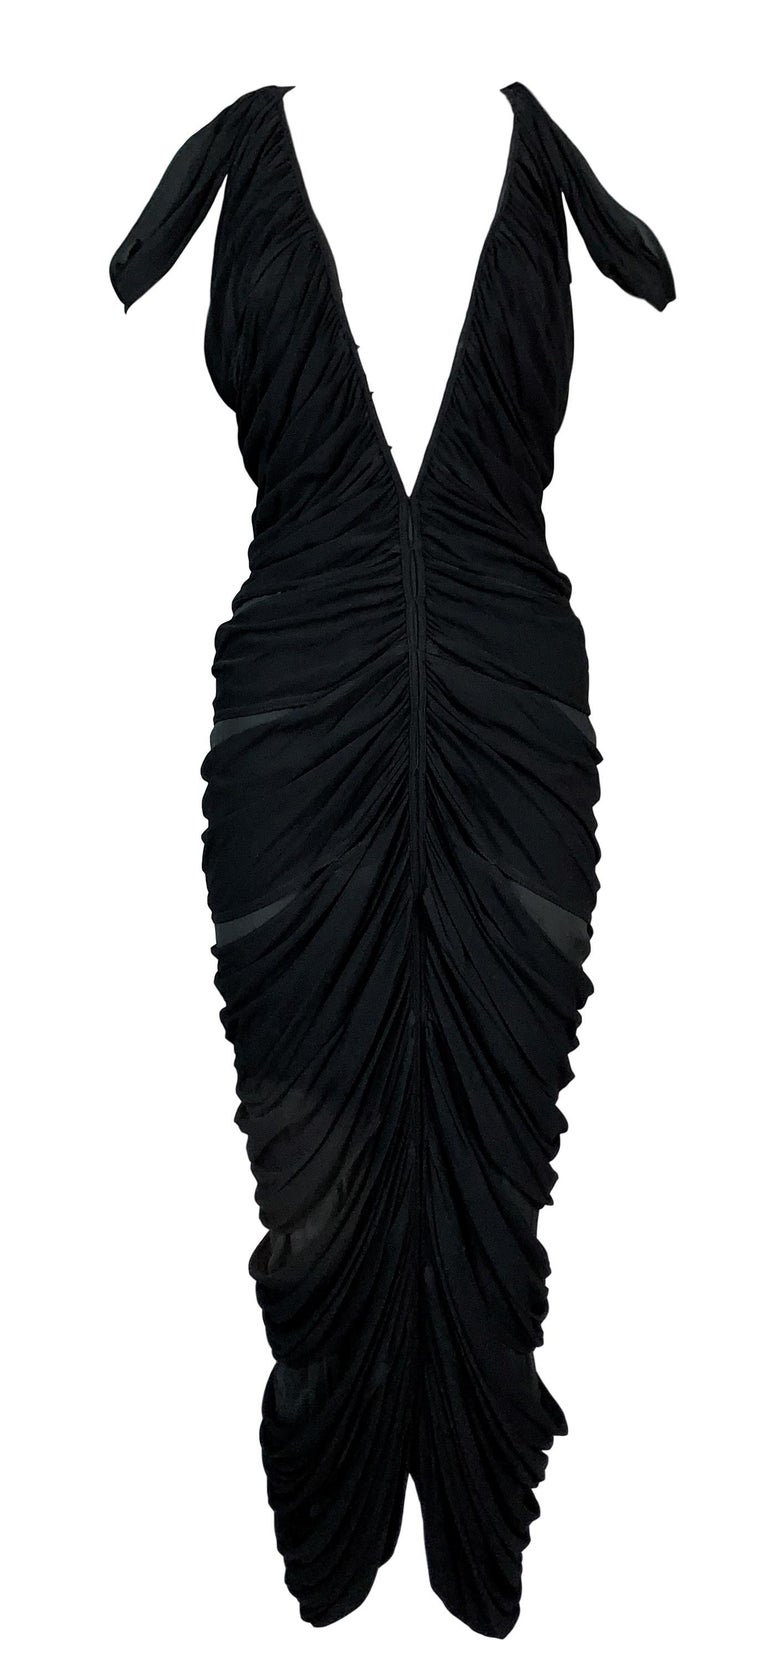 S/S 2003 Yves Saint Laurent Tom Ford Sheer Black Mummy Wrap Cut-Out ...